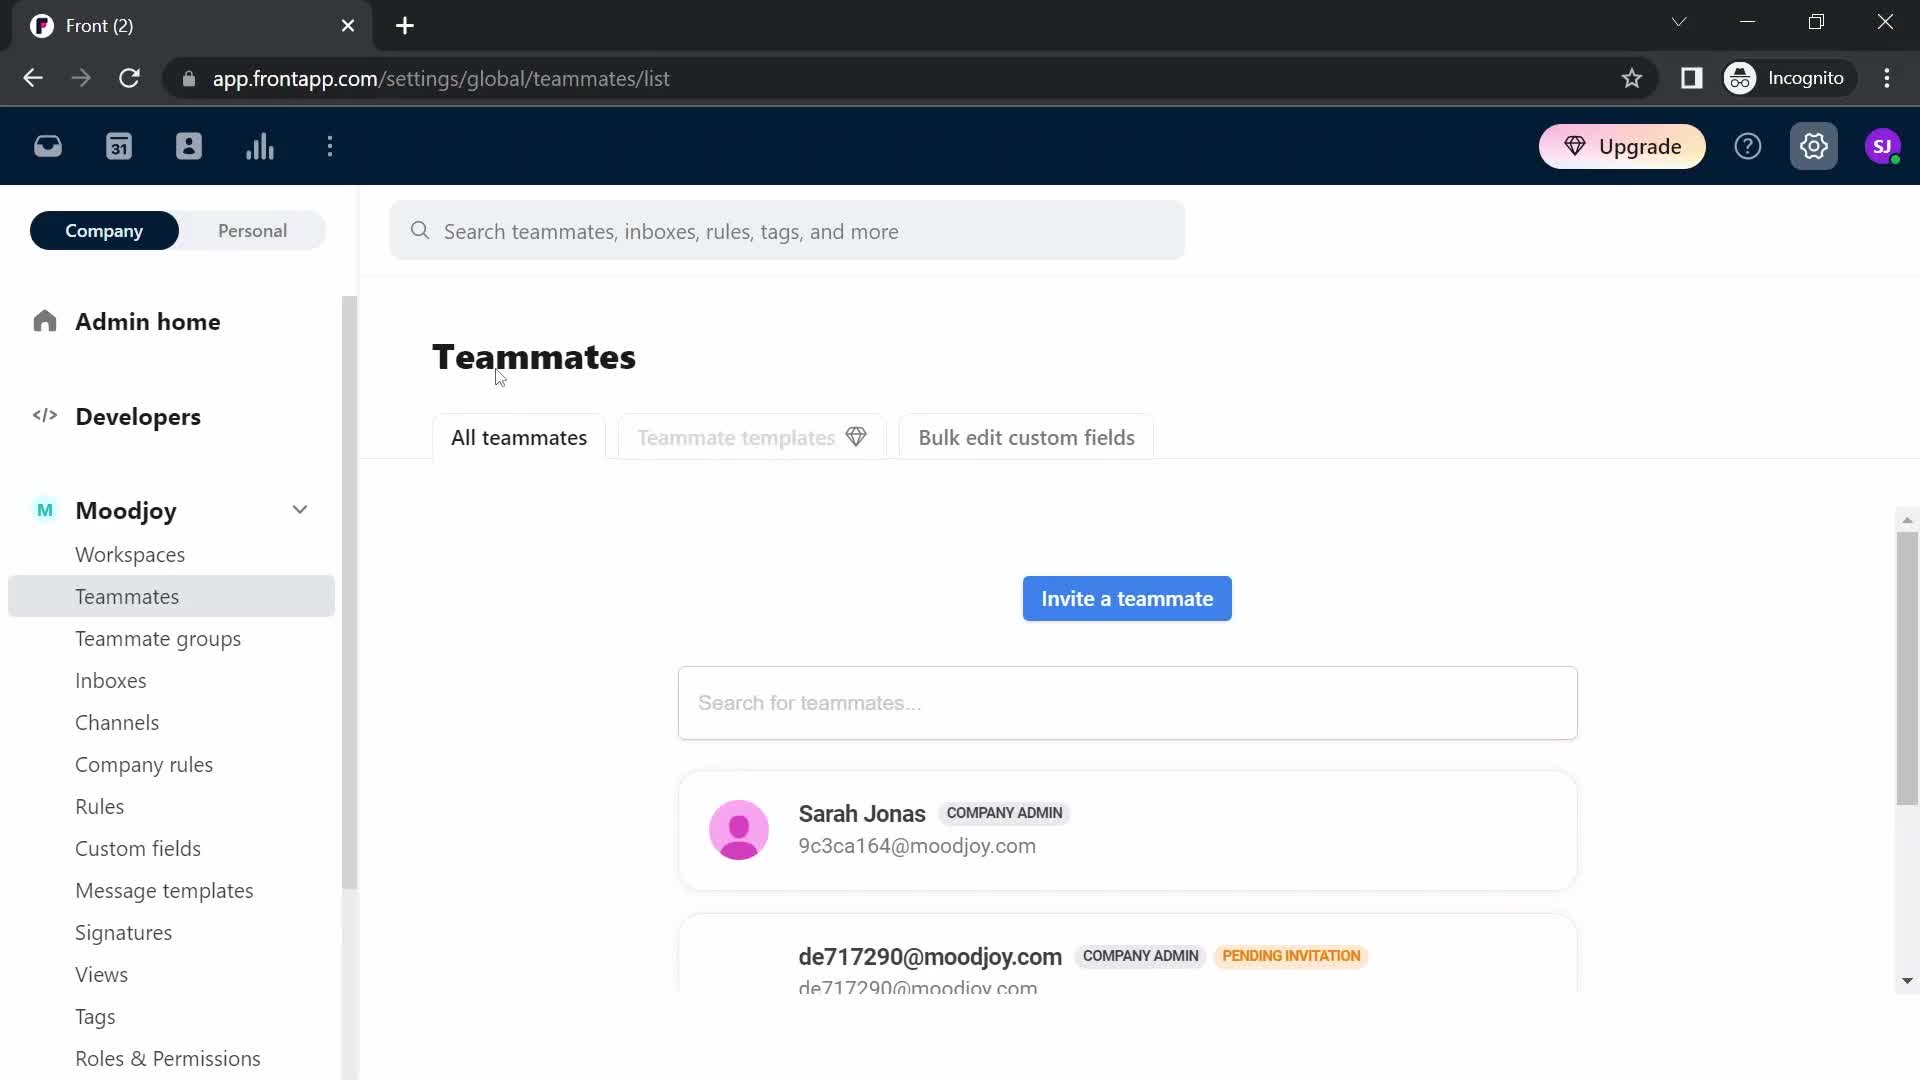 Screenshot of Teammates on Inviting people on Front user flow